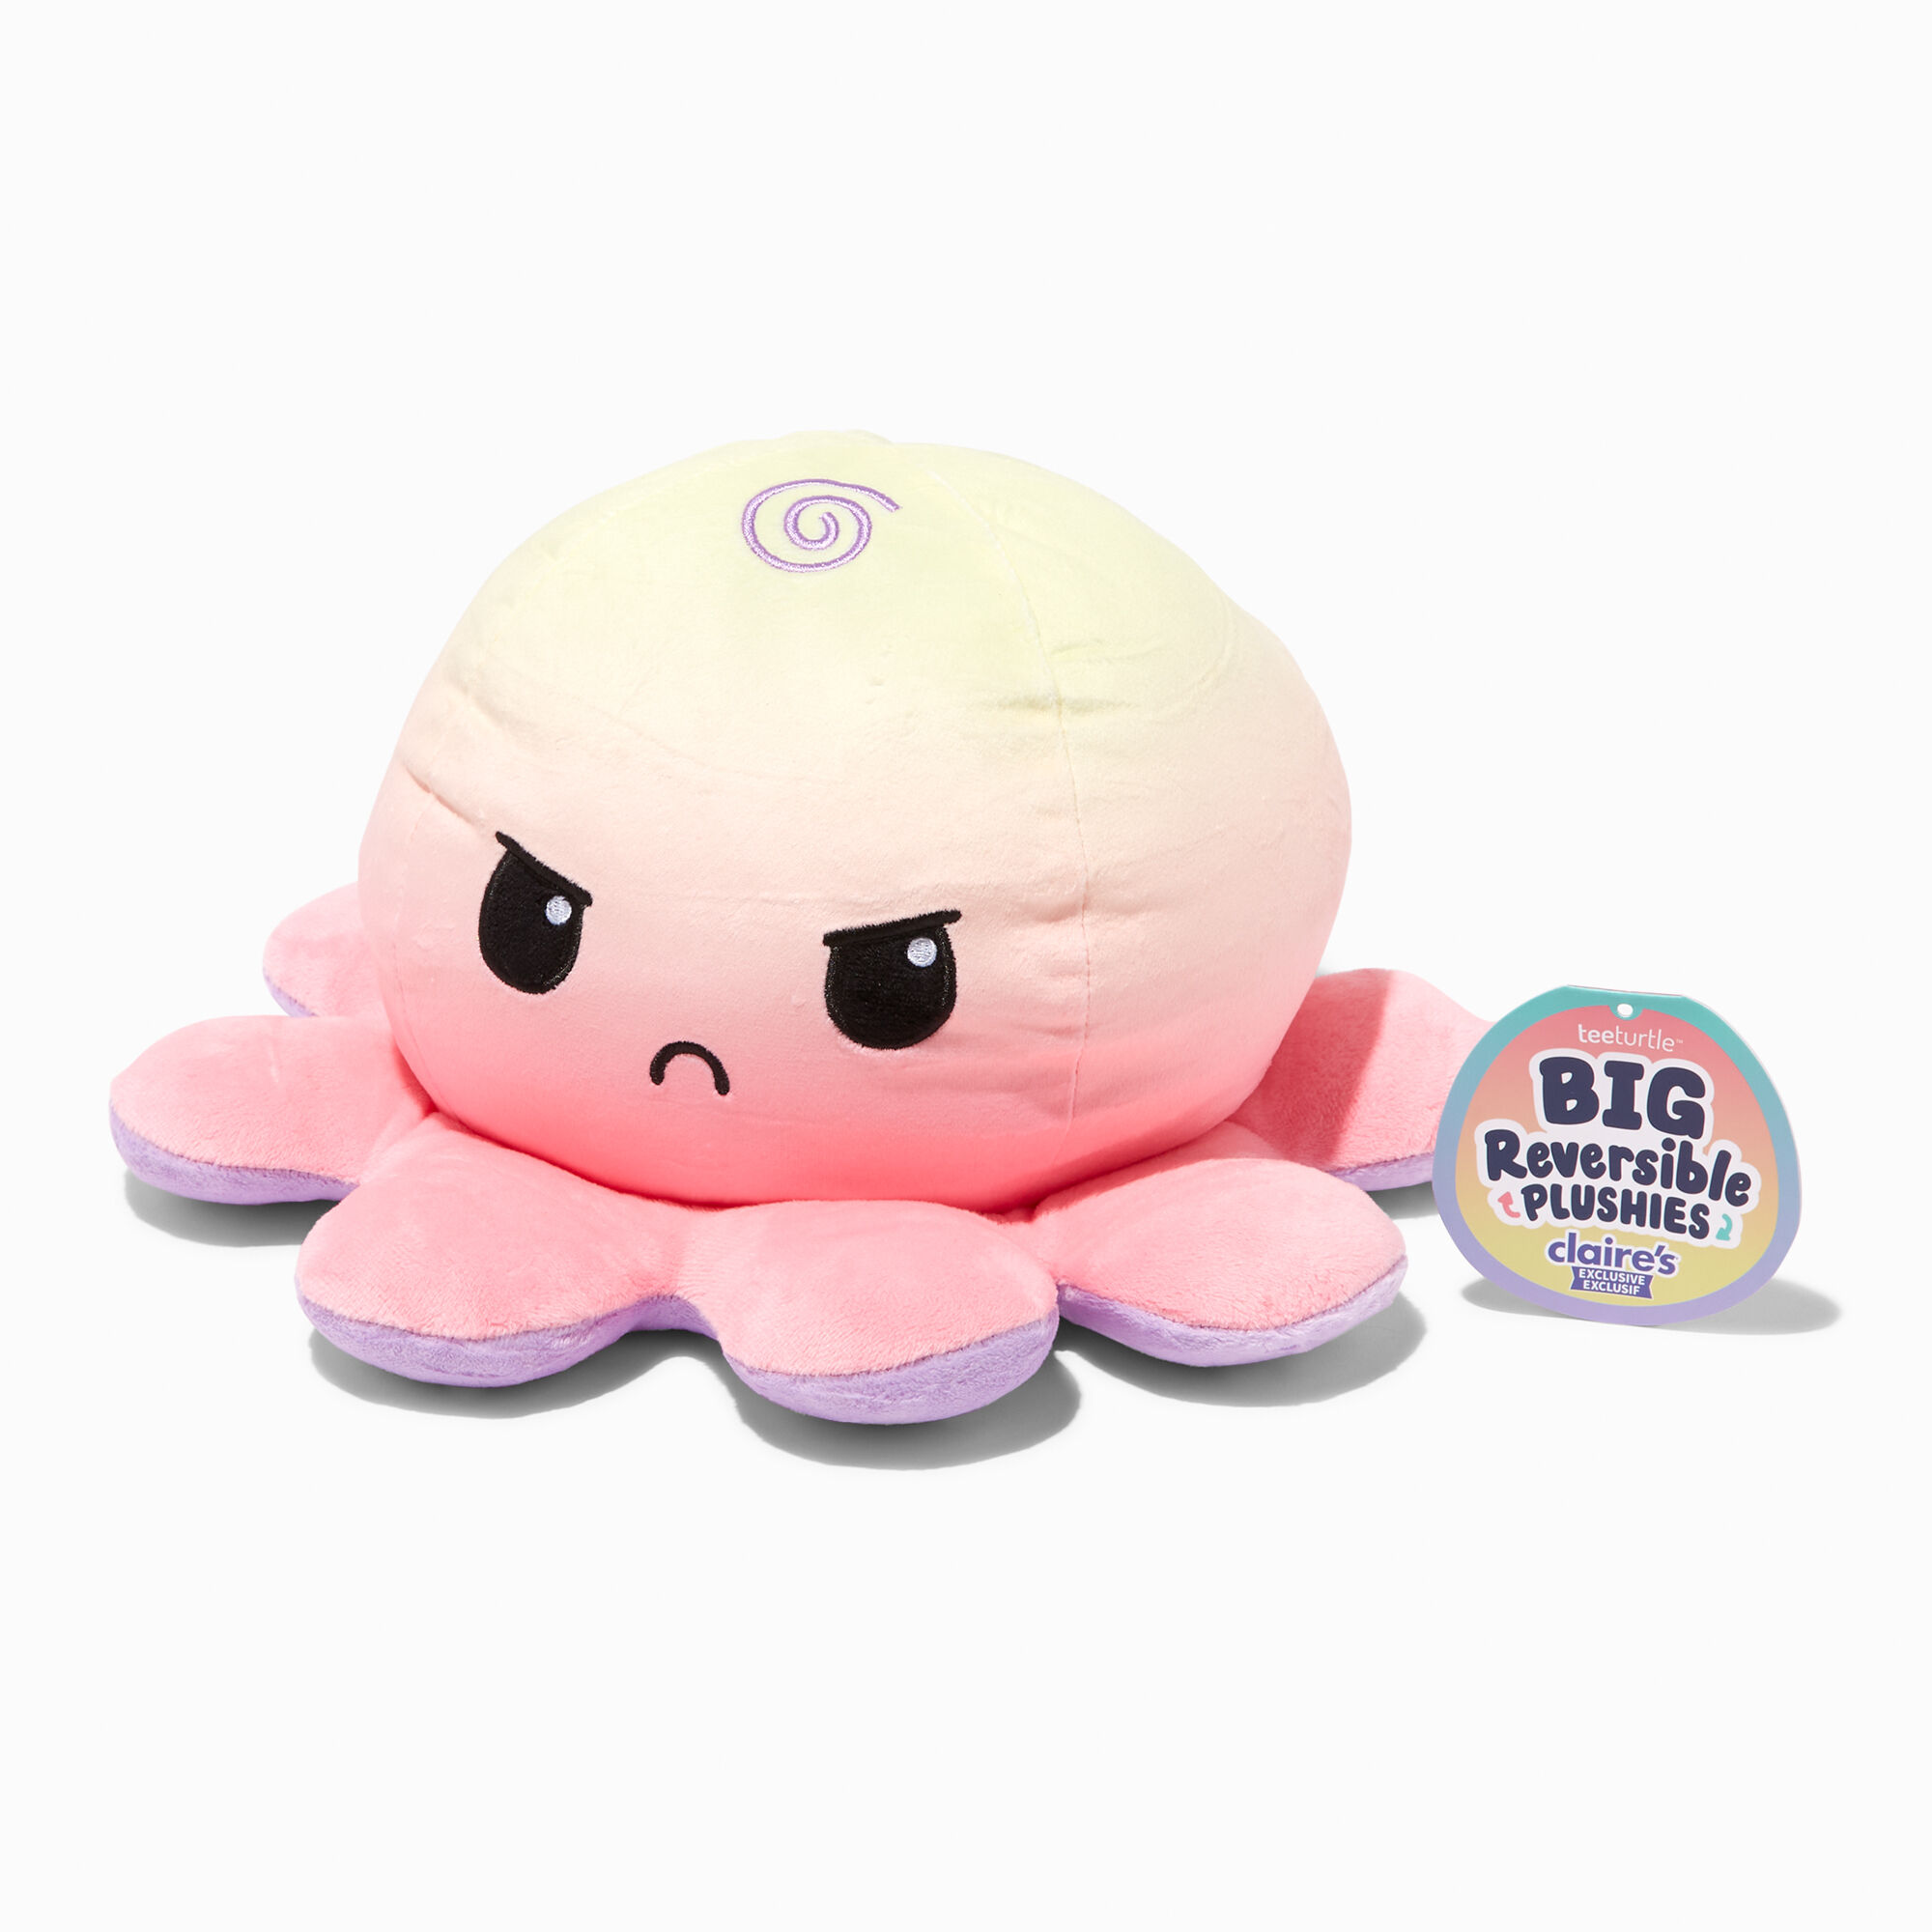 View Teeturtle Claires Exclusive Big 8 Reversible Plushies Ombre Octopus Yellow information